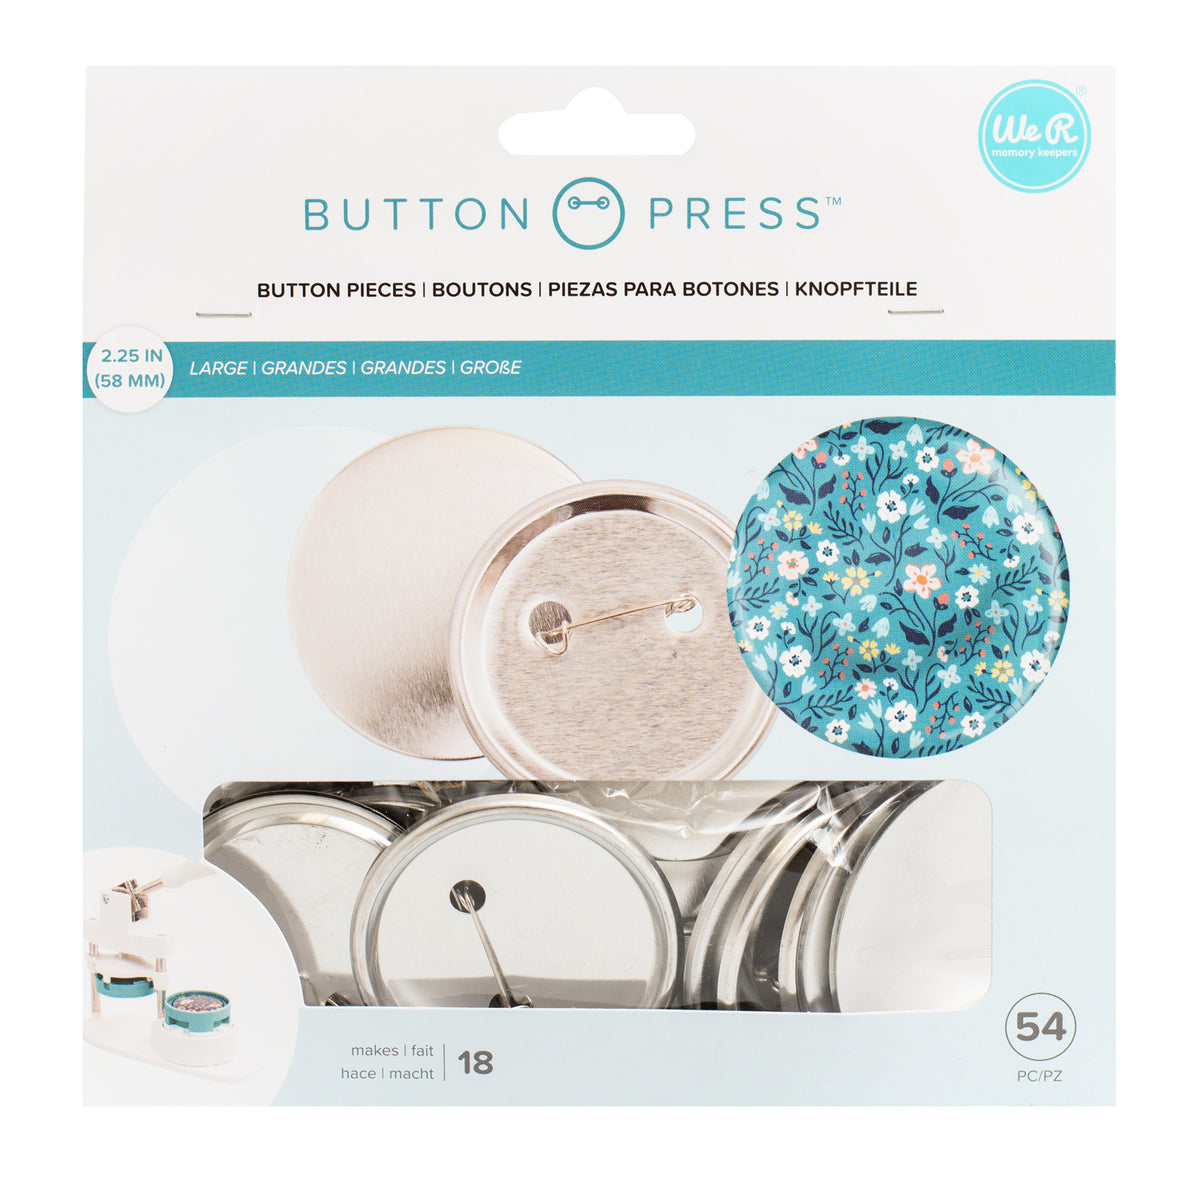 661098 We R Memory Keepers - Button Press Refill Pack Large (58 mm